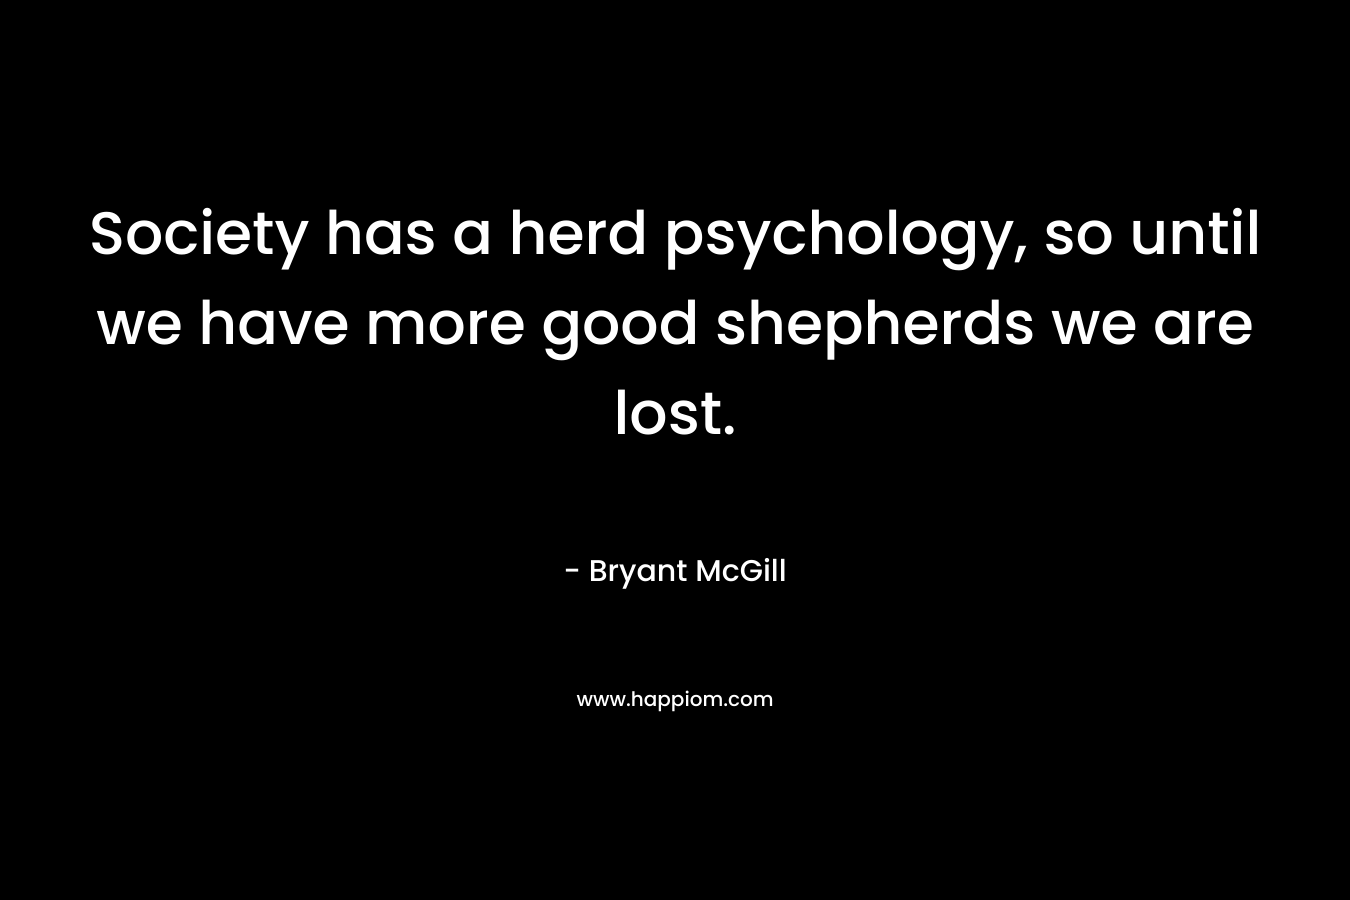 Society has a herd psychology, so until we have more good shepherds we are lost.